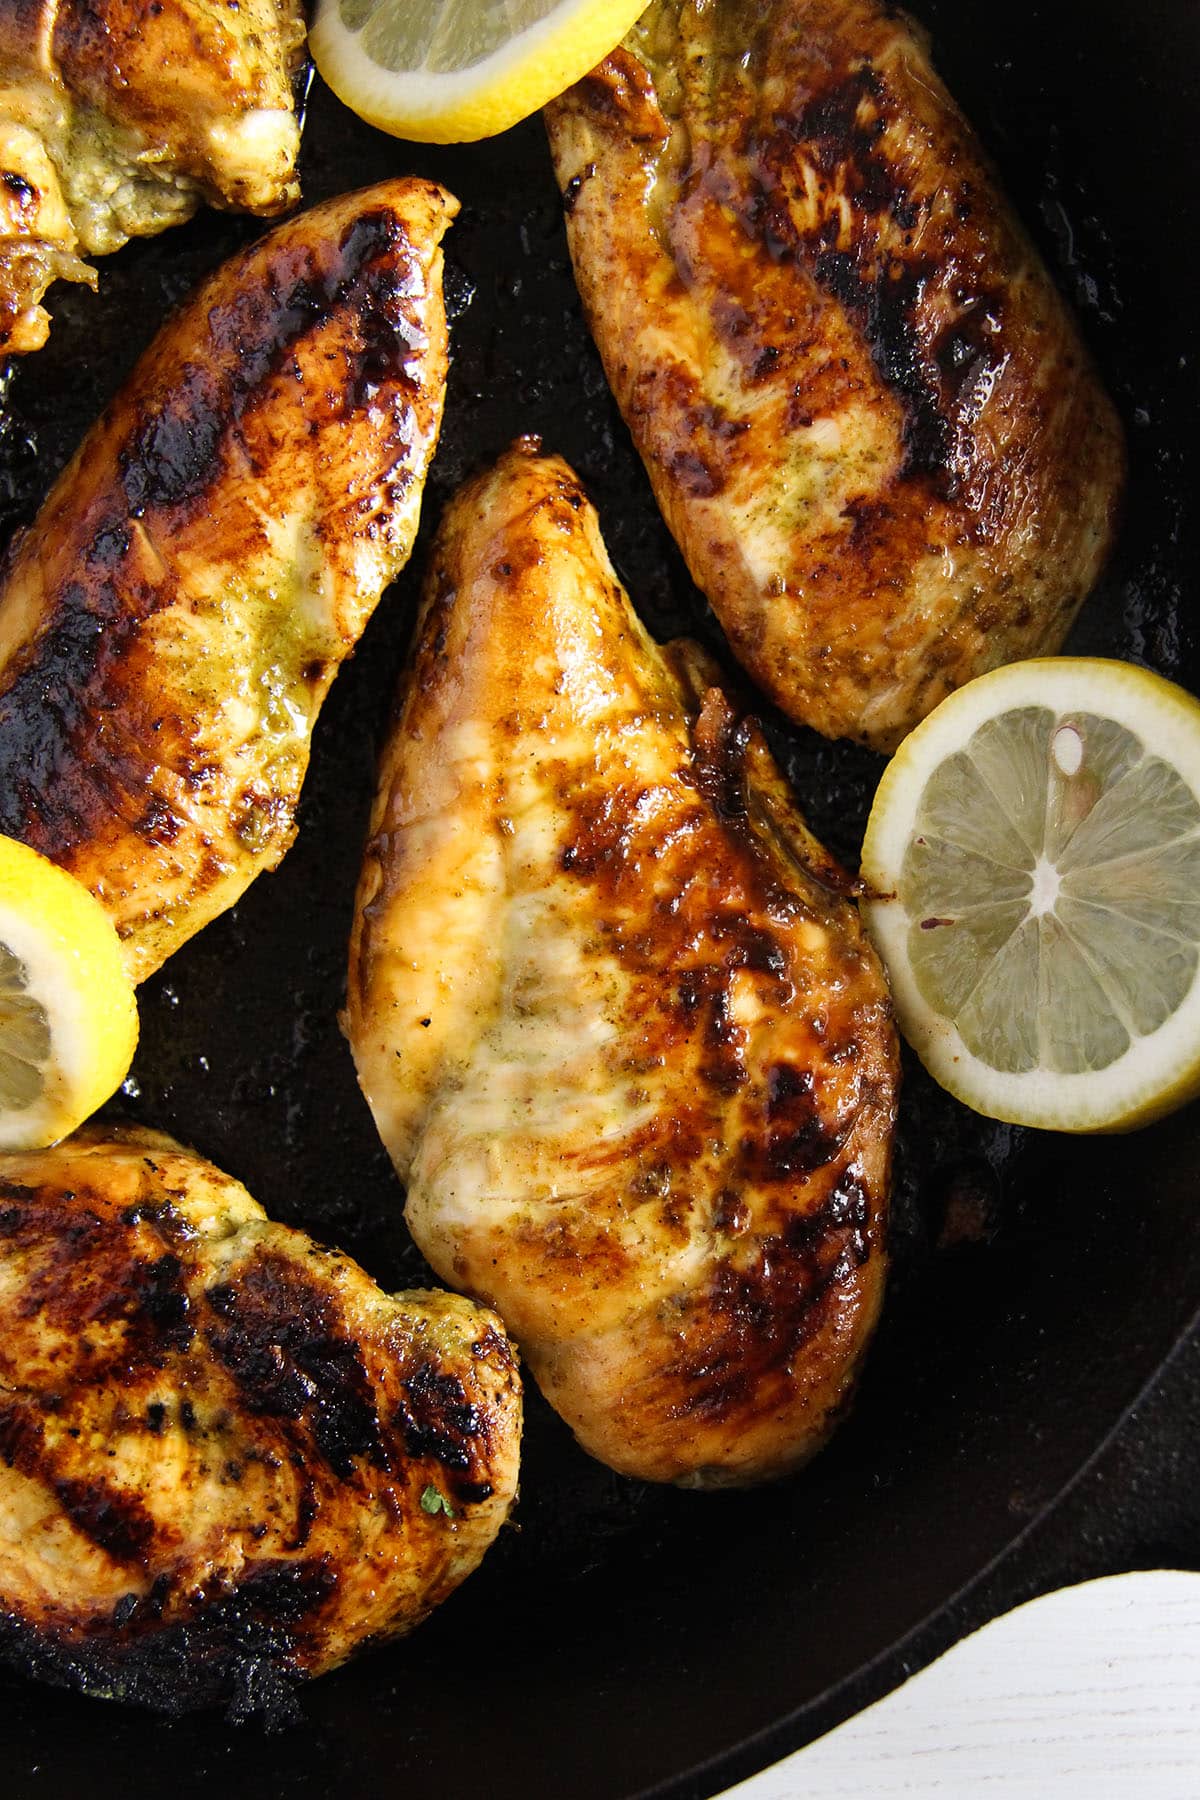 seared chicken breast and lemon slices in a cast iron skillet.